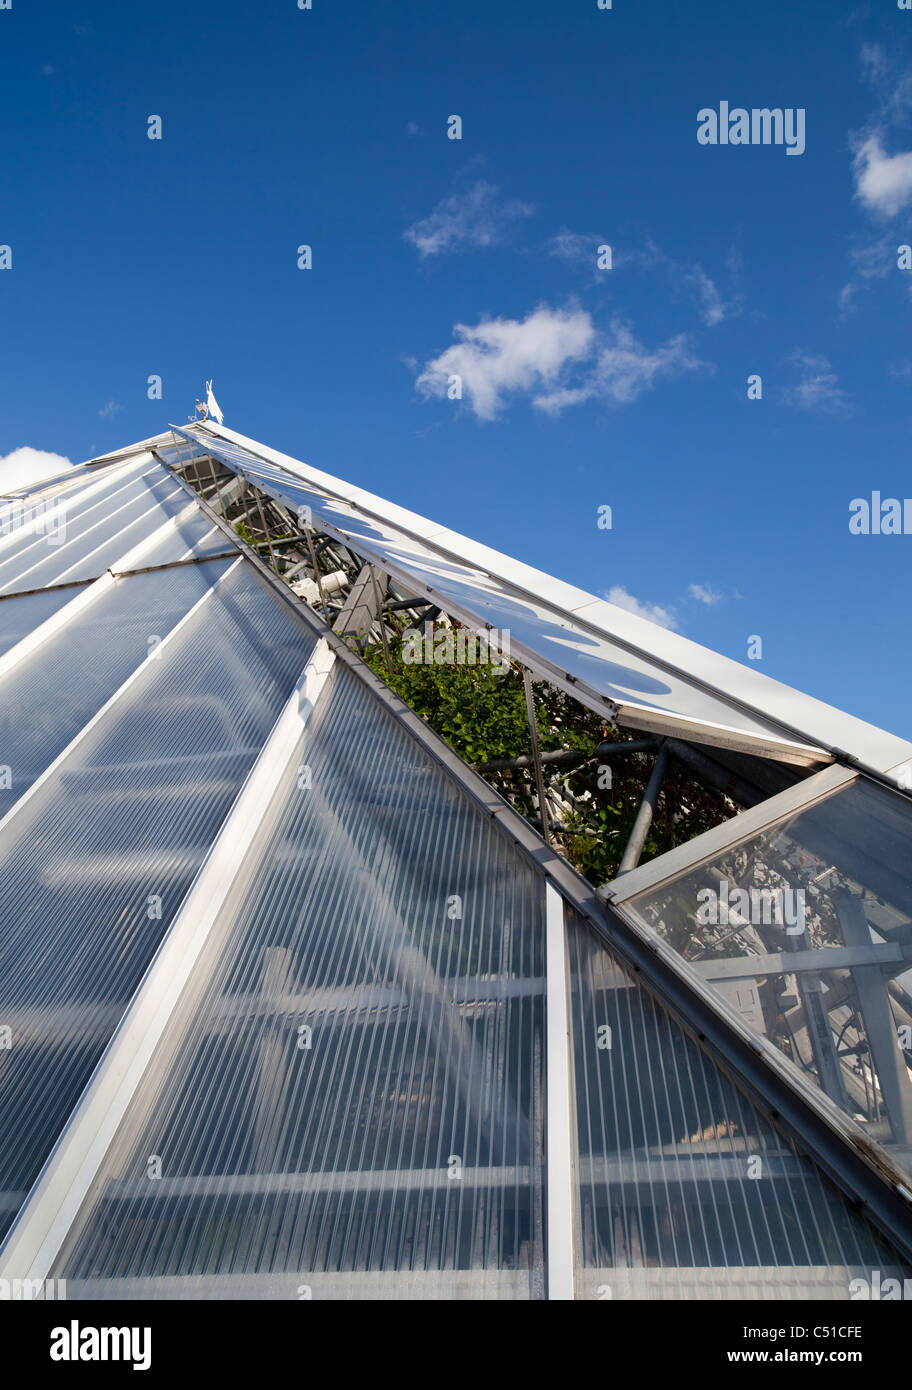 Hothouse ventilation system uses motor driven glass windows for cooling the air inside the hothouse , Finland Stock Photo